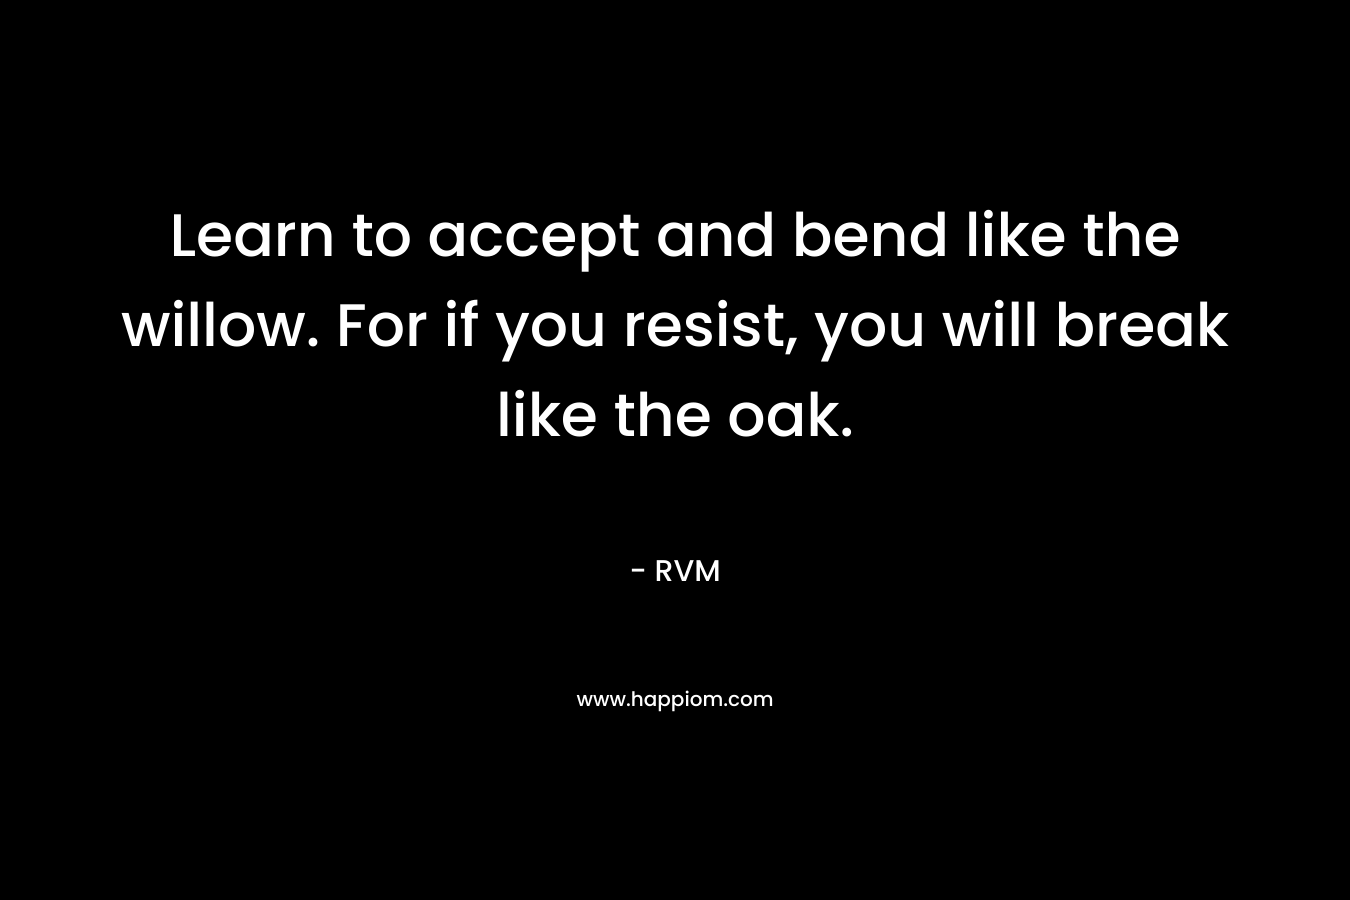 Learn to accept and bend like the willow. For if you resist, you will break like the oak.